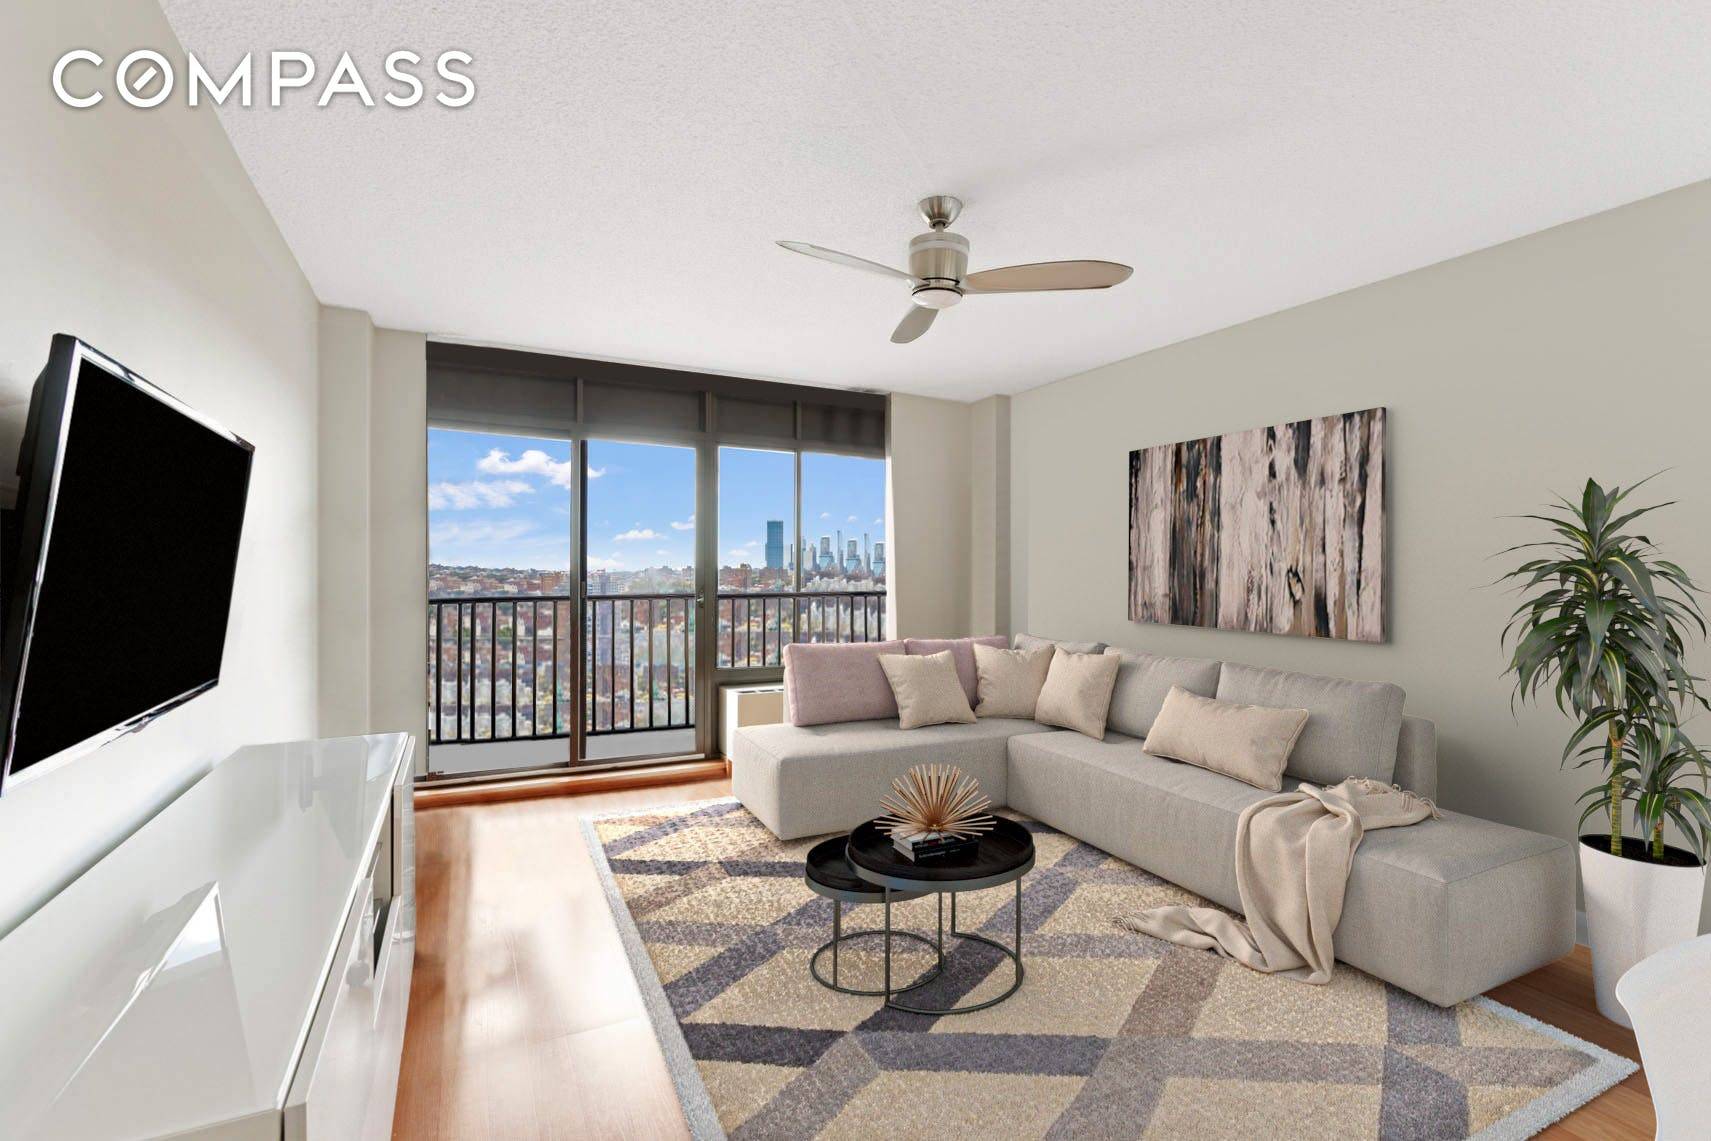 Come home to peace and tranquility at the Shore Towers Condominium complex that overlooks the East River and Astoria Park.